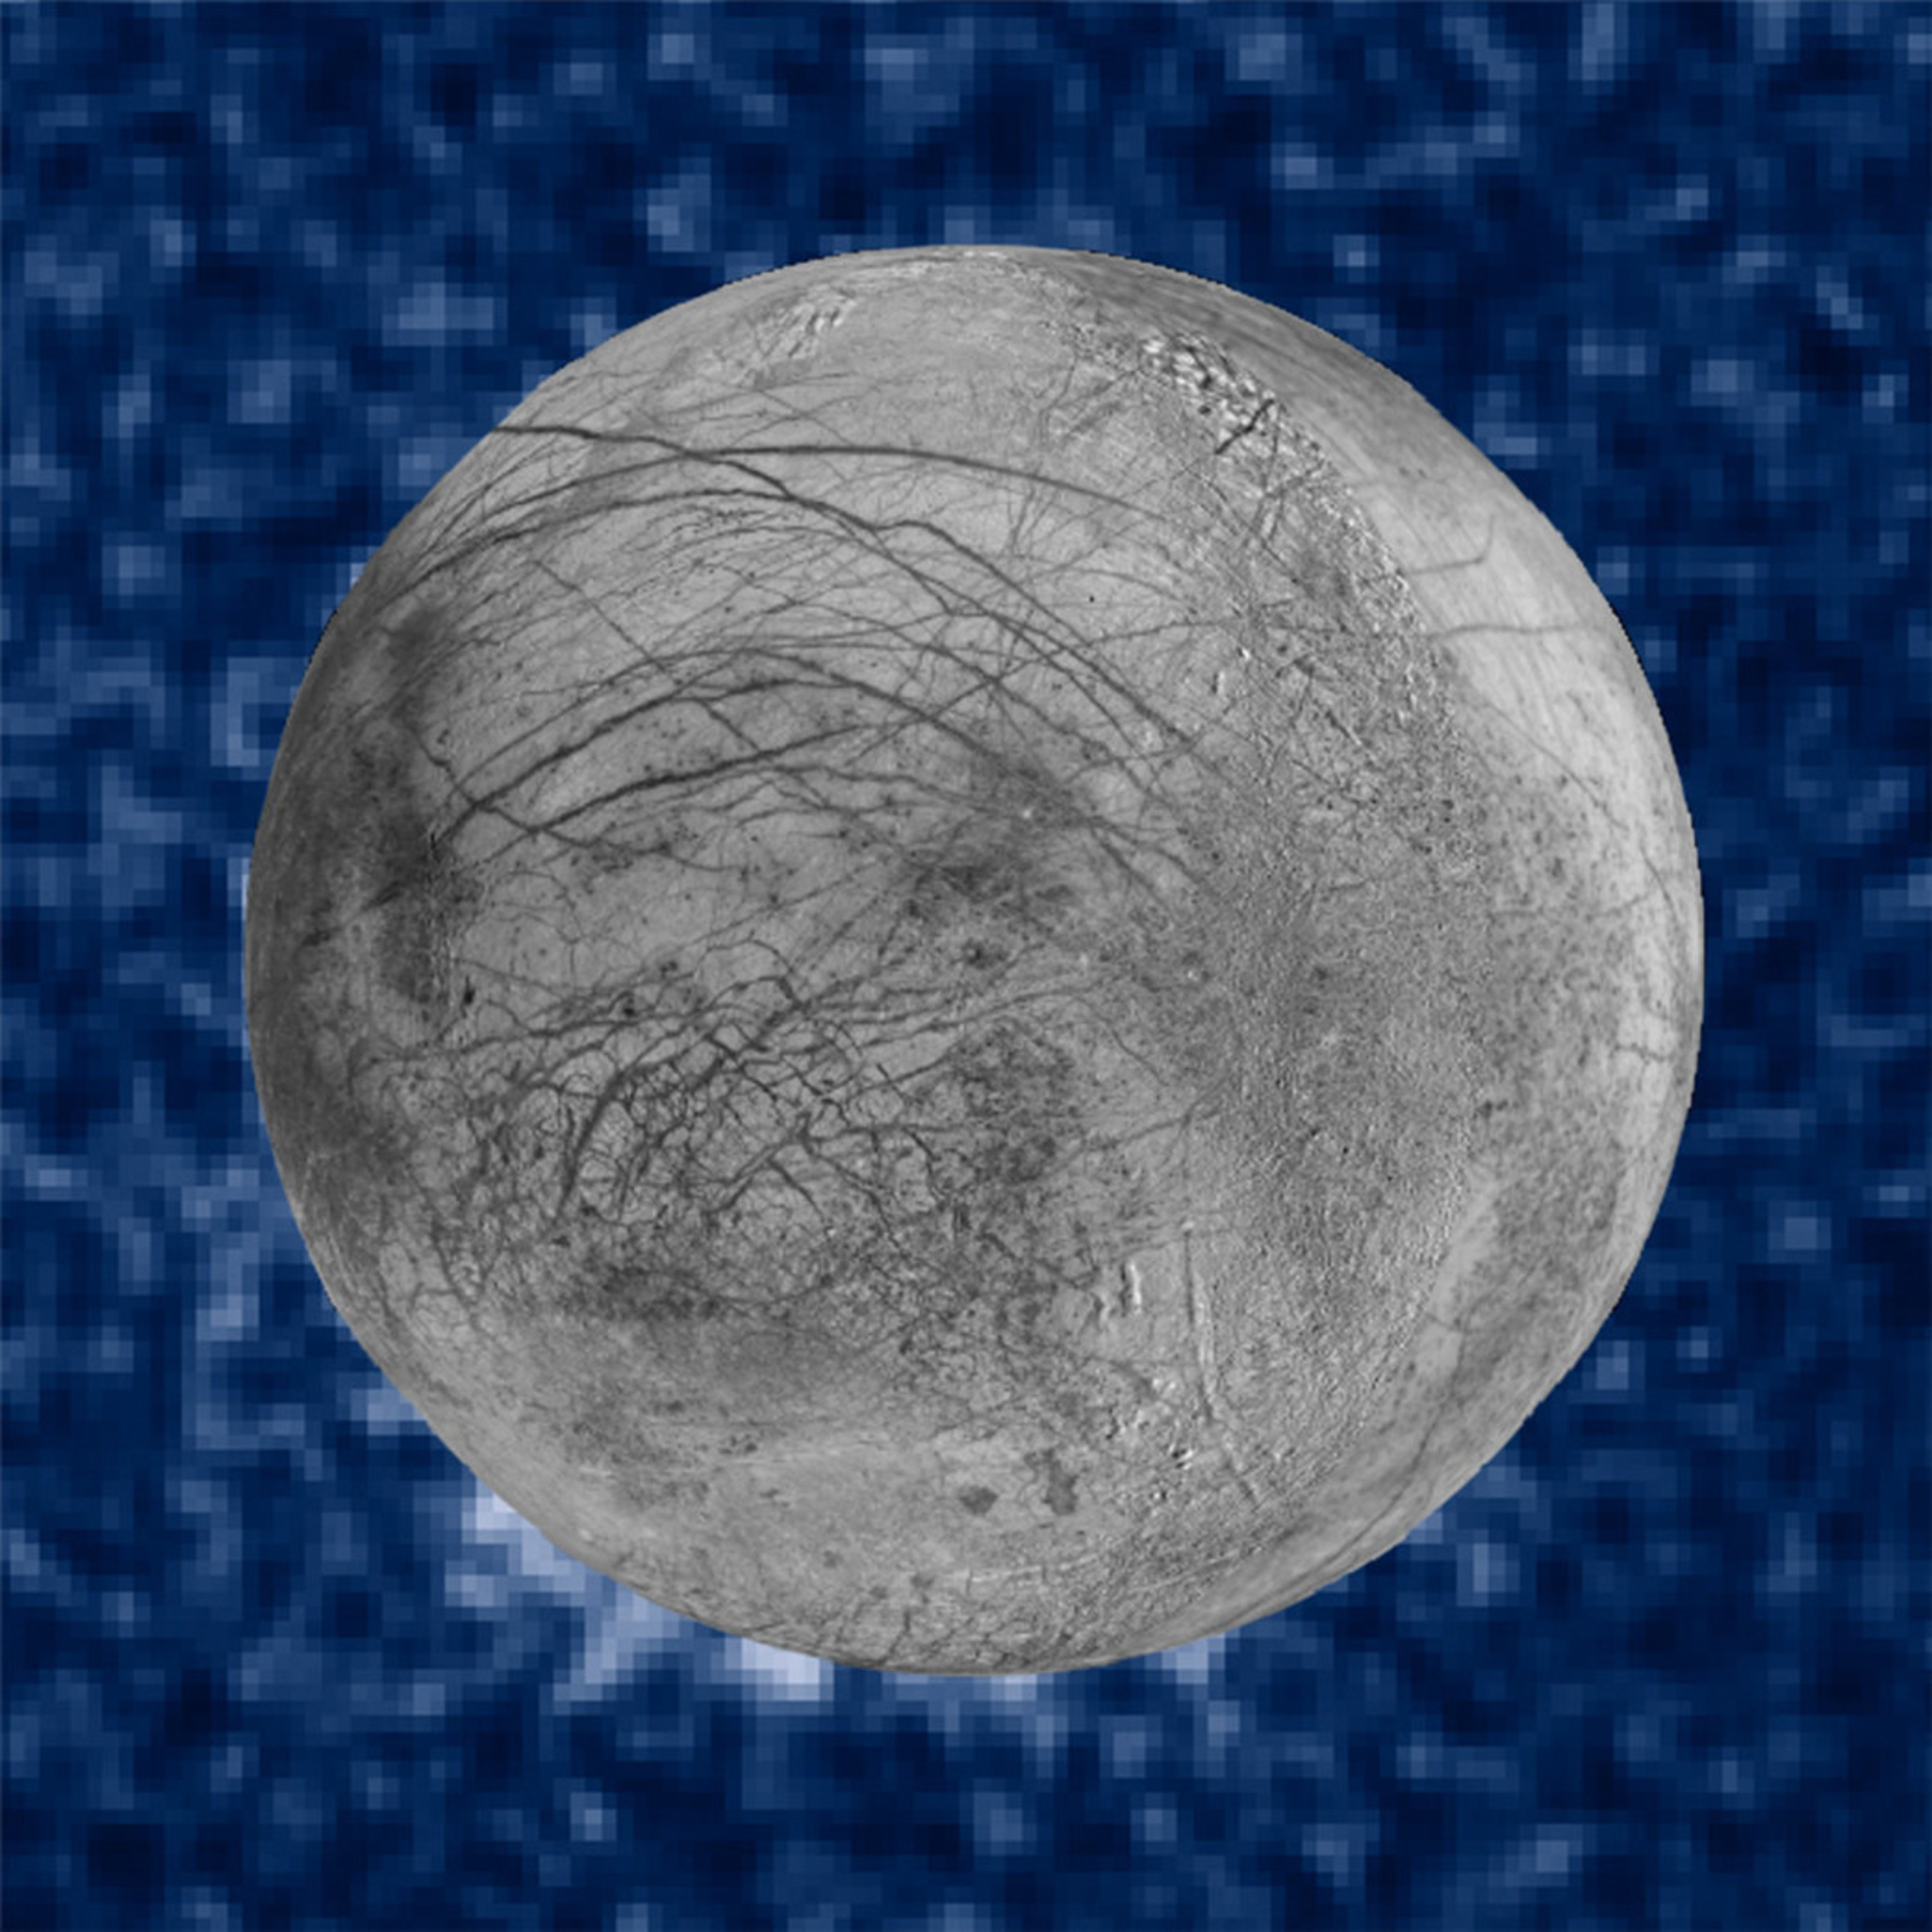 This composite image shows suspected plumes of water vapor erupting at the 7 o'clock position off the limb of Jupiter's moon Europa. The plumes, photographed by NASA's Hubble's Space Telescope, are seen in silhouette as the moon passed in front of Jupiter. Hubble's ultraviolet sensitivity allowed for the features -- rising over 100 miles above Europa's icy surface -- to be discerned. The water is believed to come from a subsurface ocean on Europa. The image of Europa, superimposed on Hubble data acquired in January 2014, is assembled from data from the Galileo and Voyager missions.